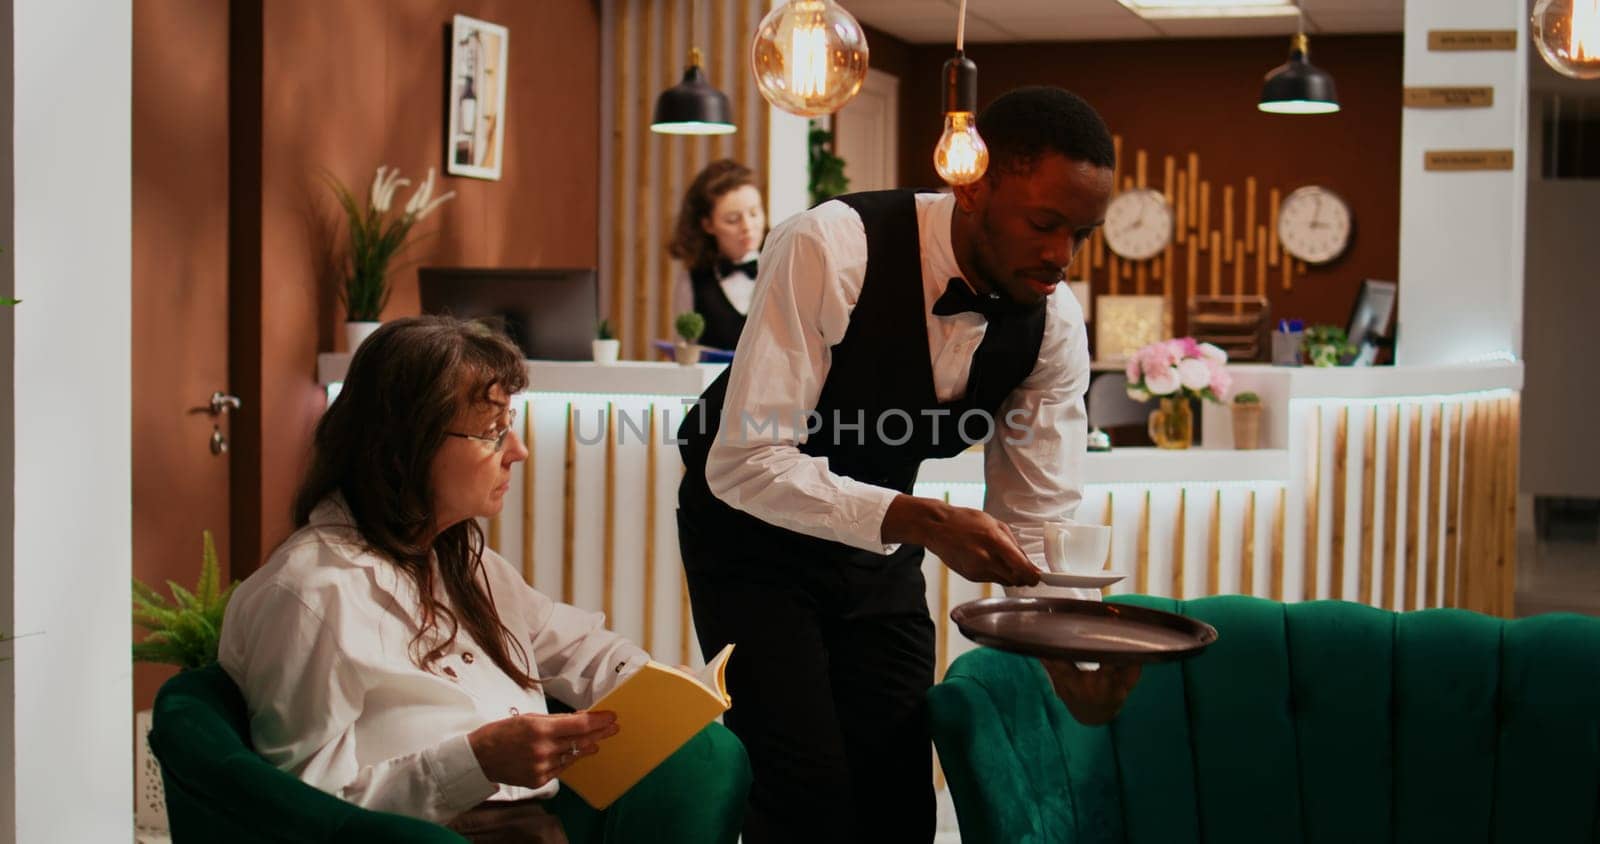 Bellhop serving coffee cup to woman client relaxing in lounge area, senior hotel guest enjoying refreshment and reading book. Employee providing all inclusive services on holiday.